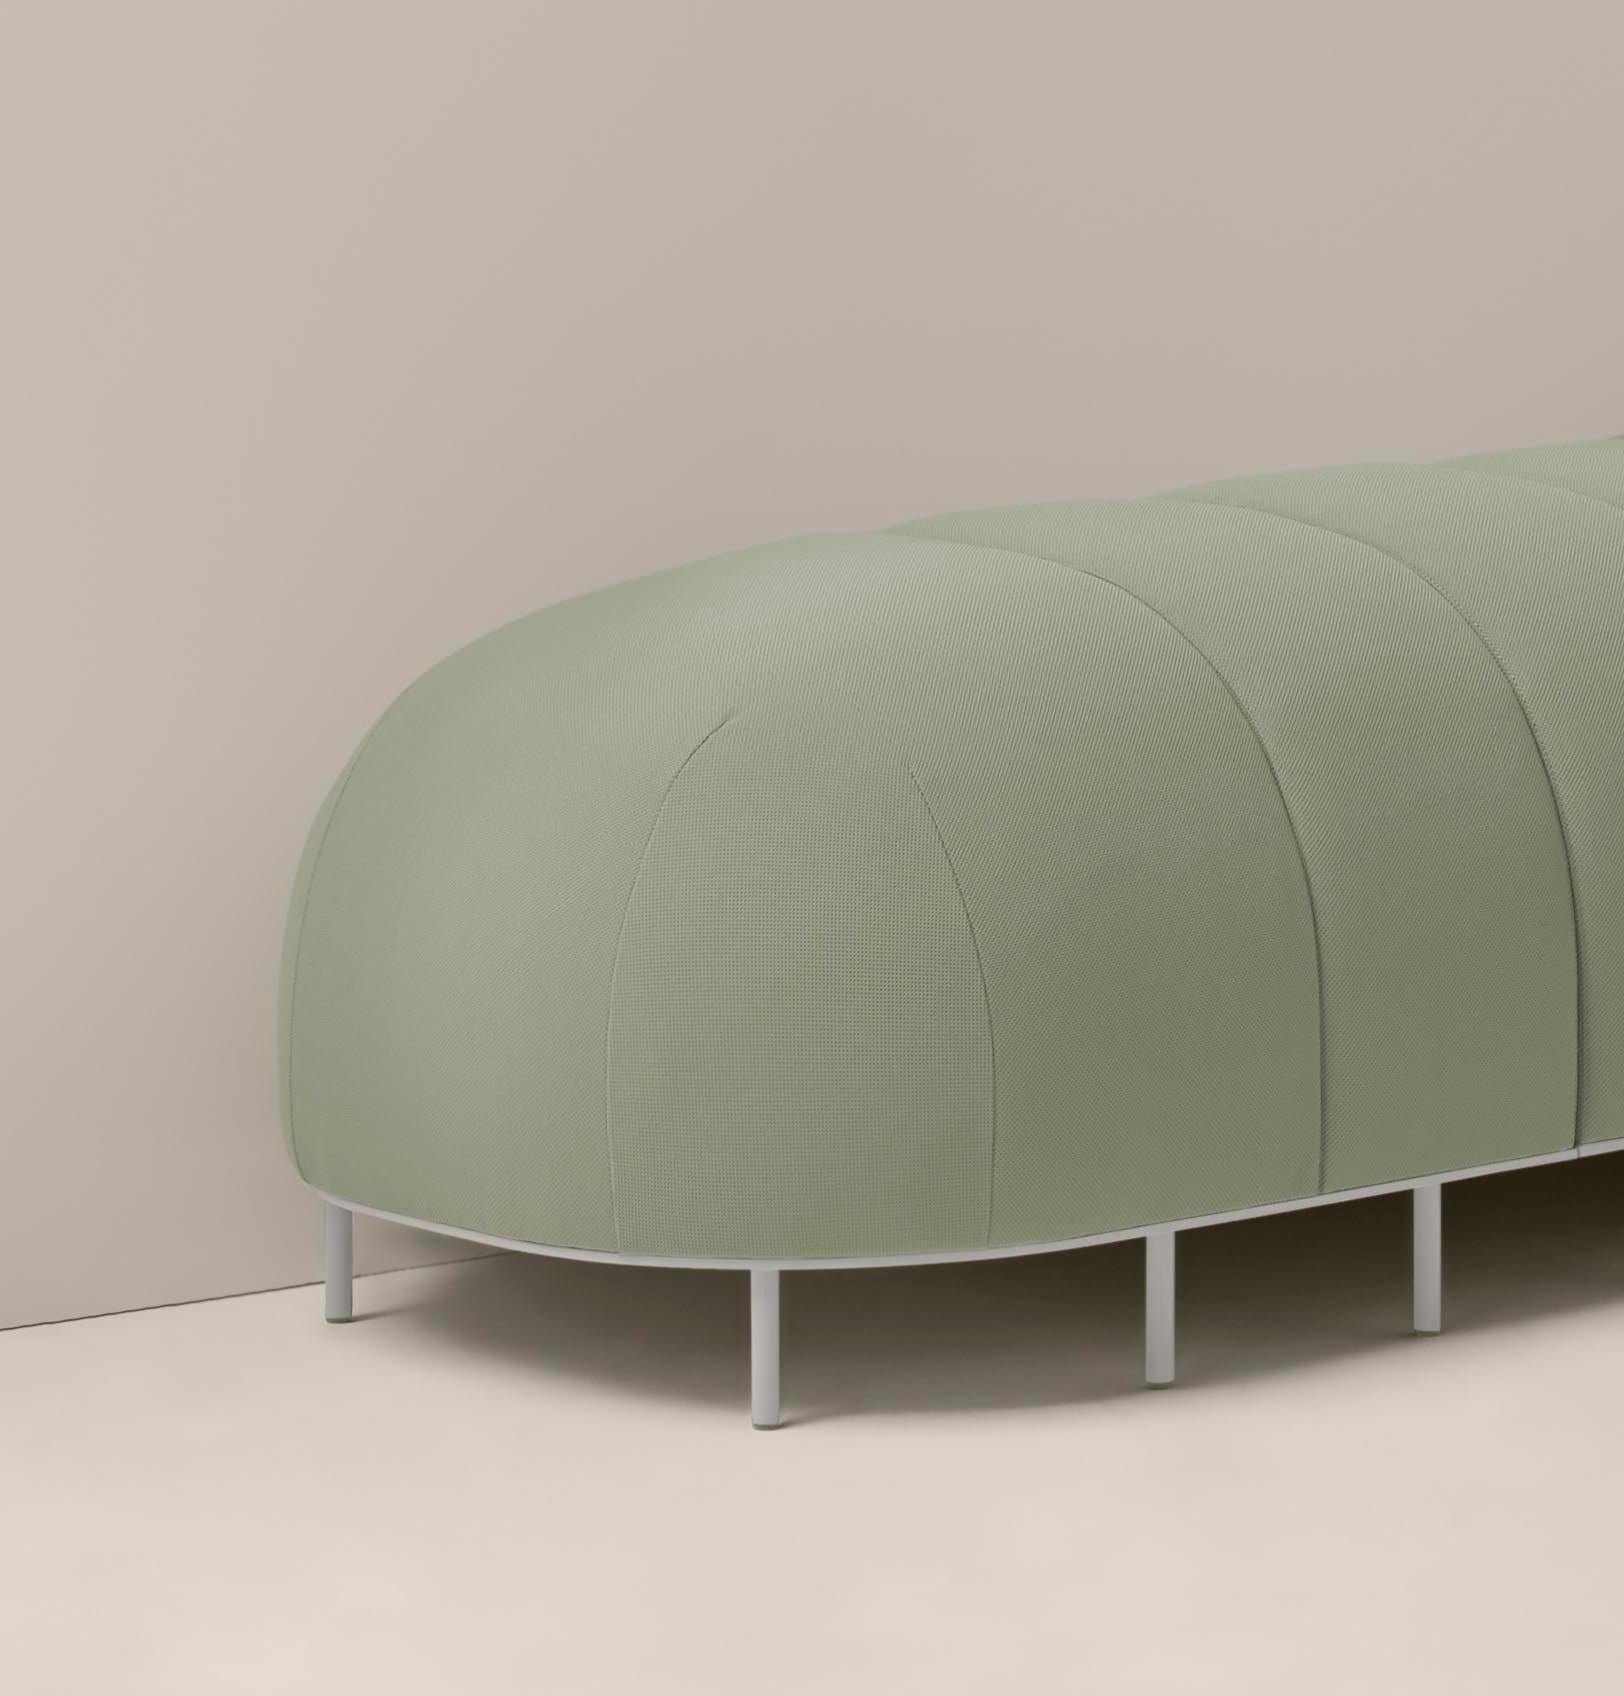 End Module Worm bench by Pepe Albargues
Dimensions: D 65 x W 65 x H 50 cm
Materials: Plywood, foam CMHR, iron
Available in different colors. Straight and curved modules available

Worm is an amusing bench that can evolve and change according to